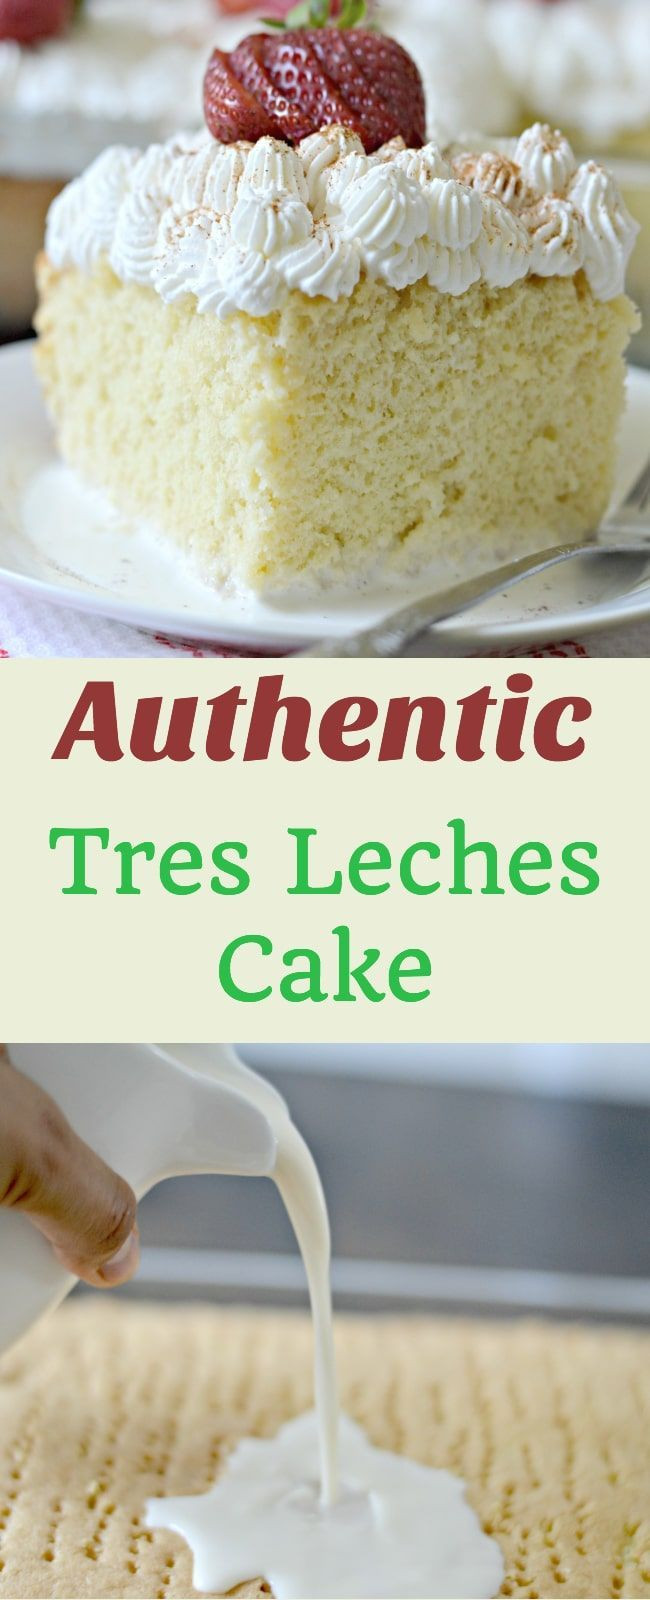 Authentic Tres Leches Cake Recipe With Fruit
 Tres Leches cake is an authentic Mexican dessert that is